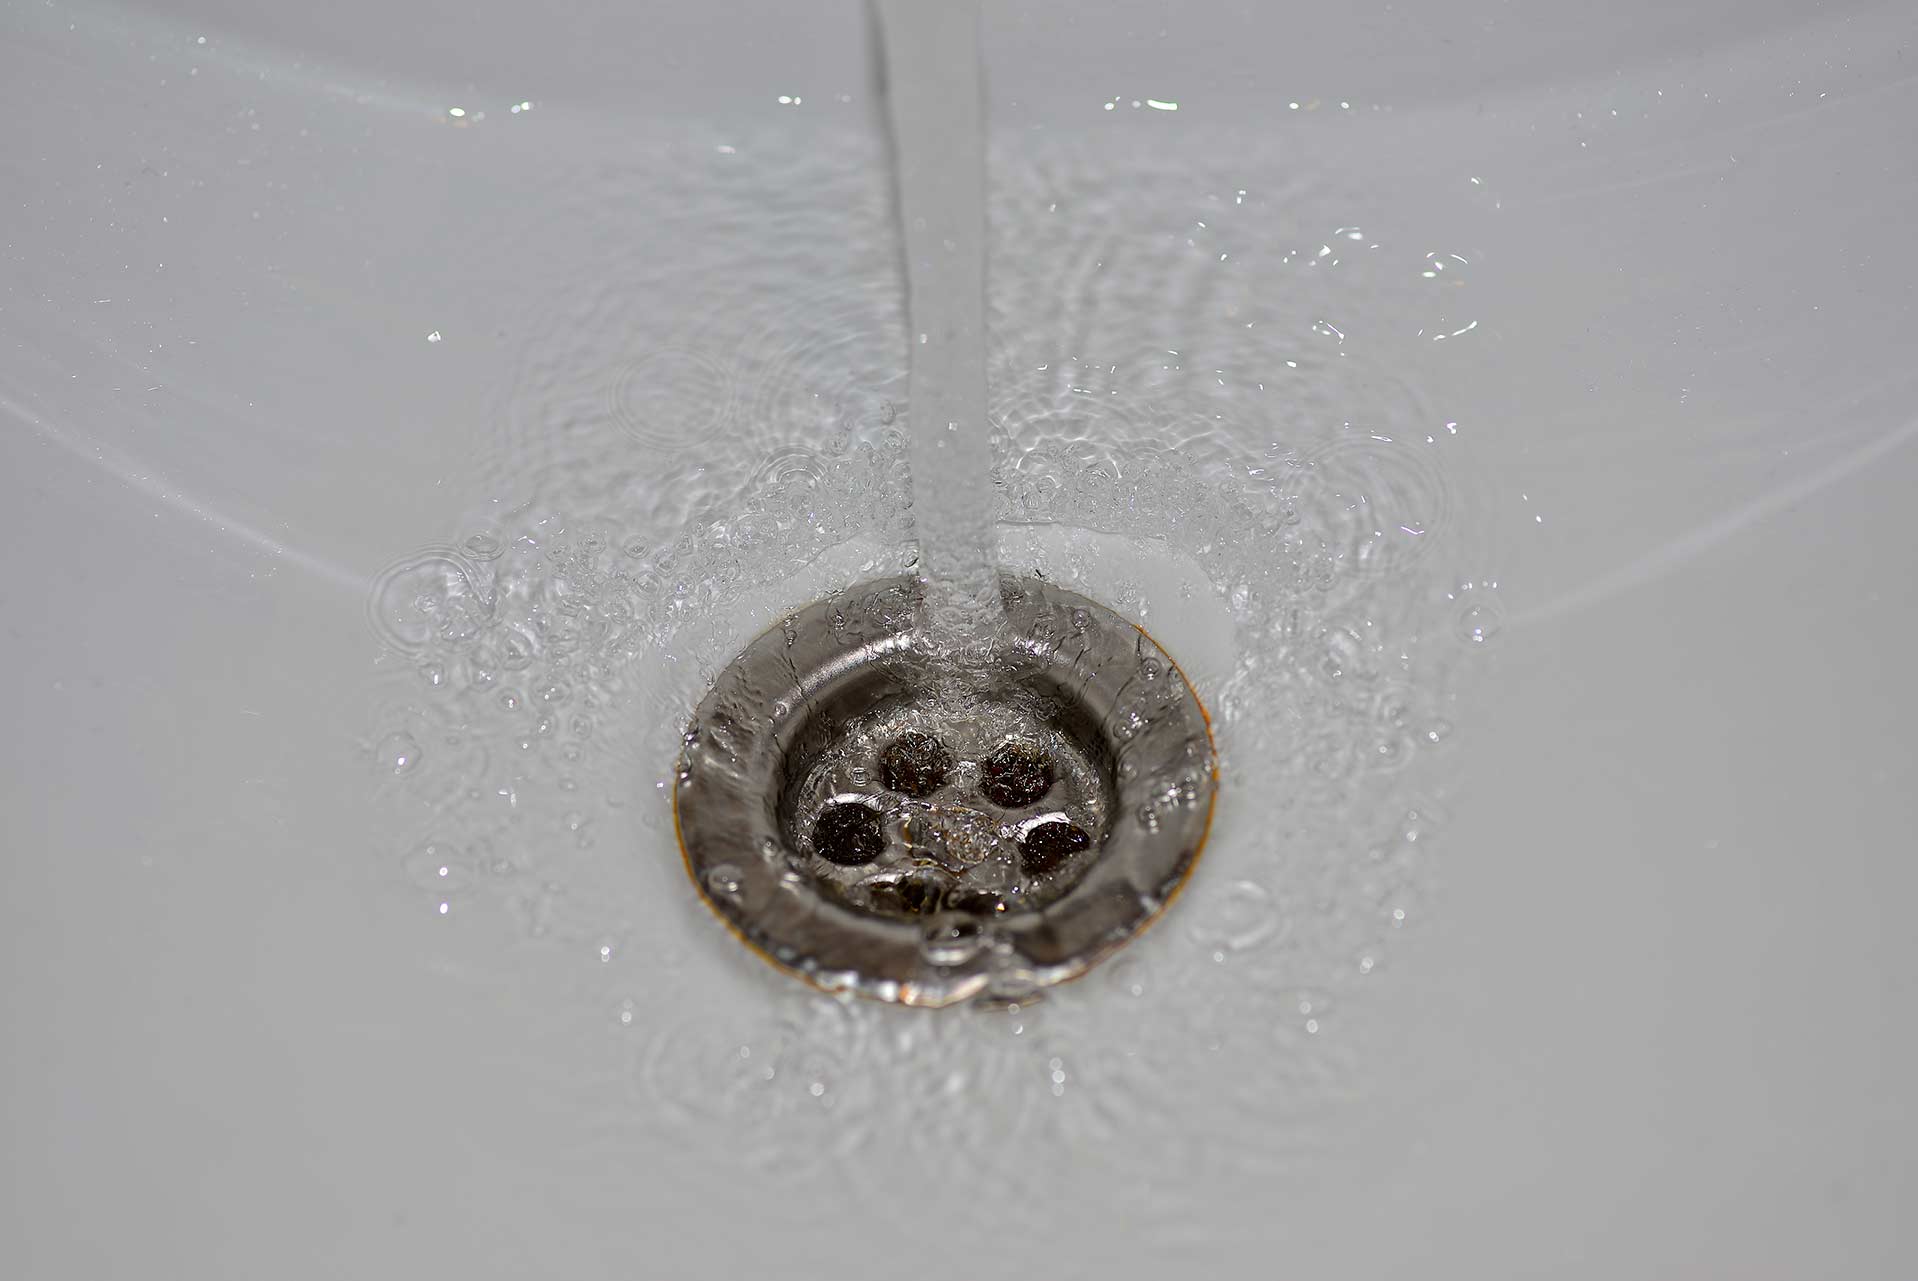 A2B Drains provides services to unblock blocked sinks and drains for properties in Shepton Mallet.